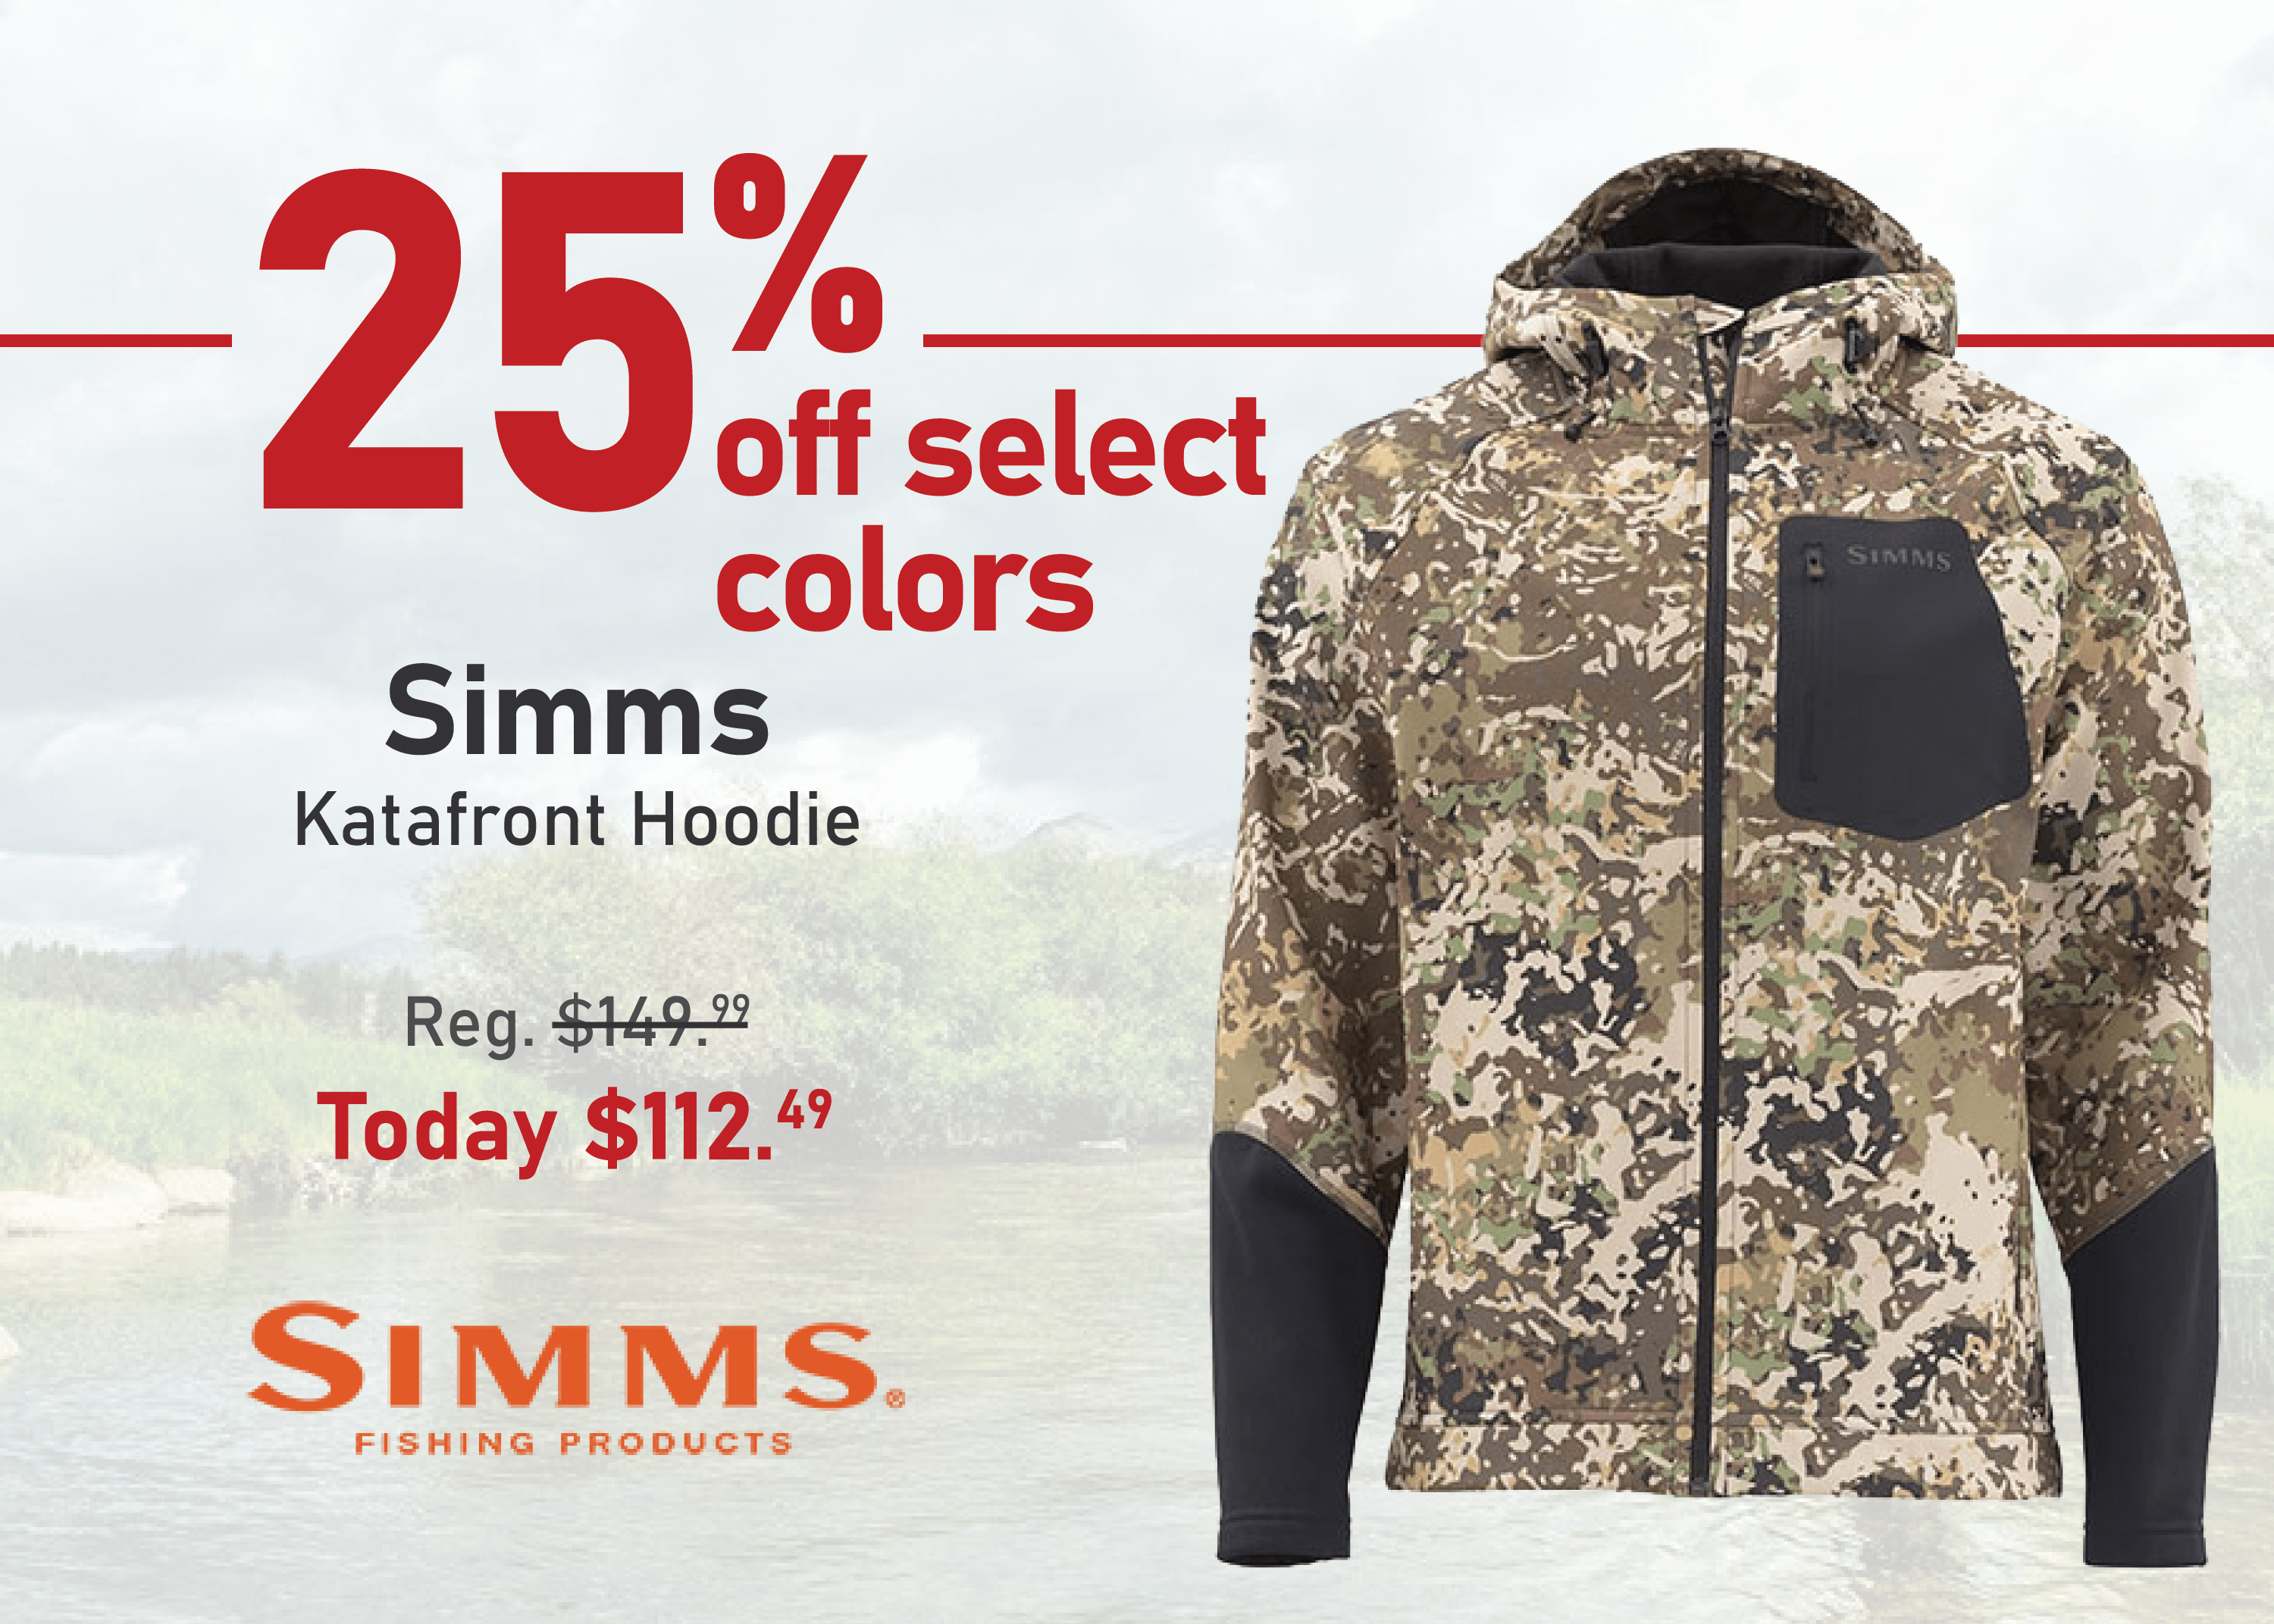 Take 25% off select colors of the Simms Katafront Hoodie